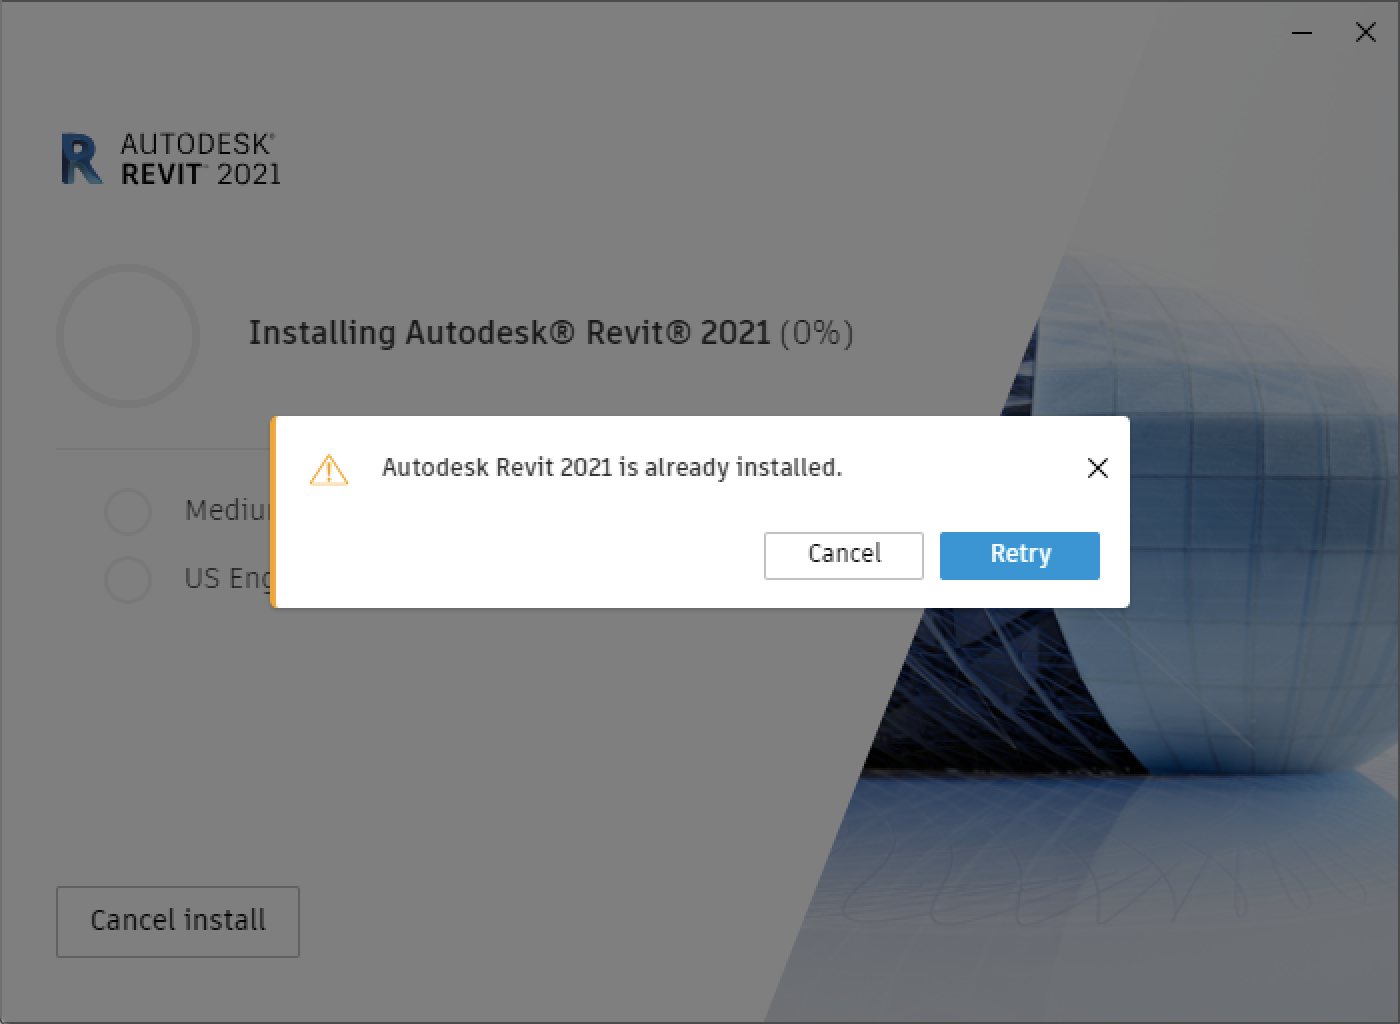 "Autodesk Revit is already installed." when attempting to install